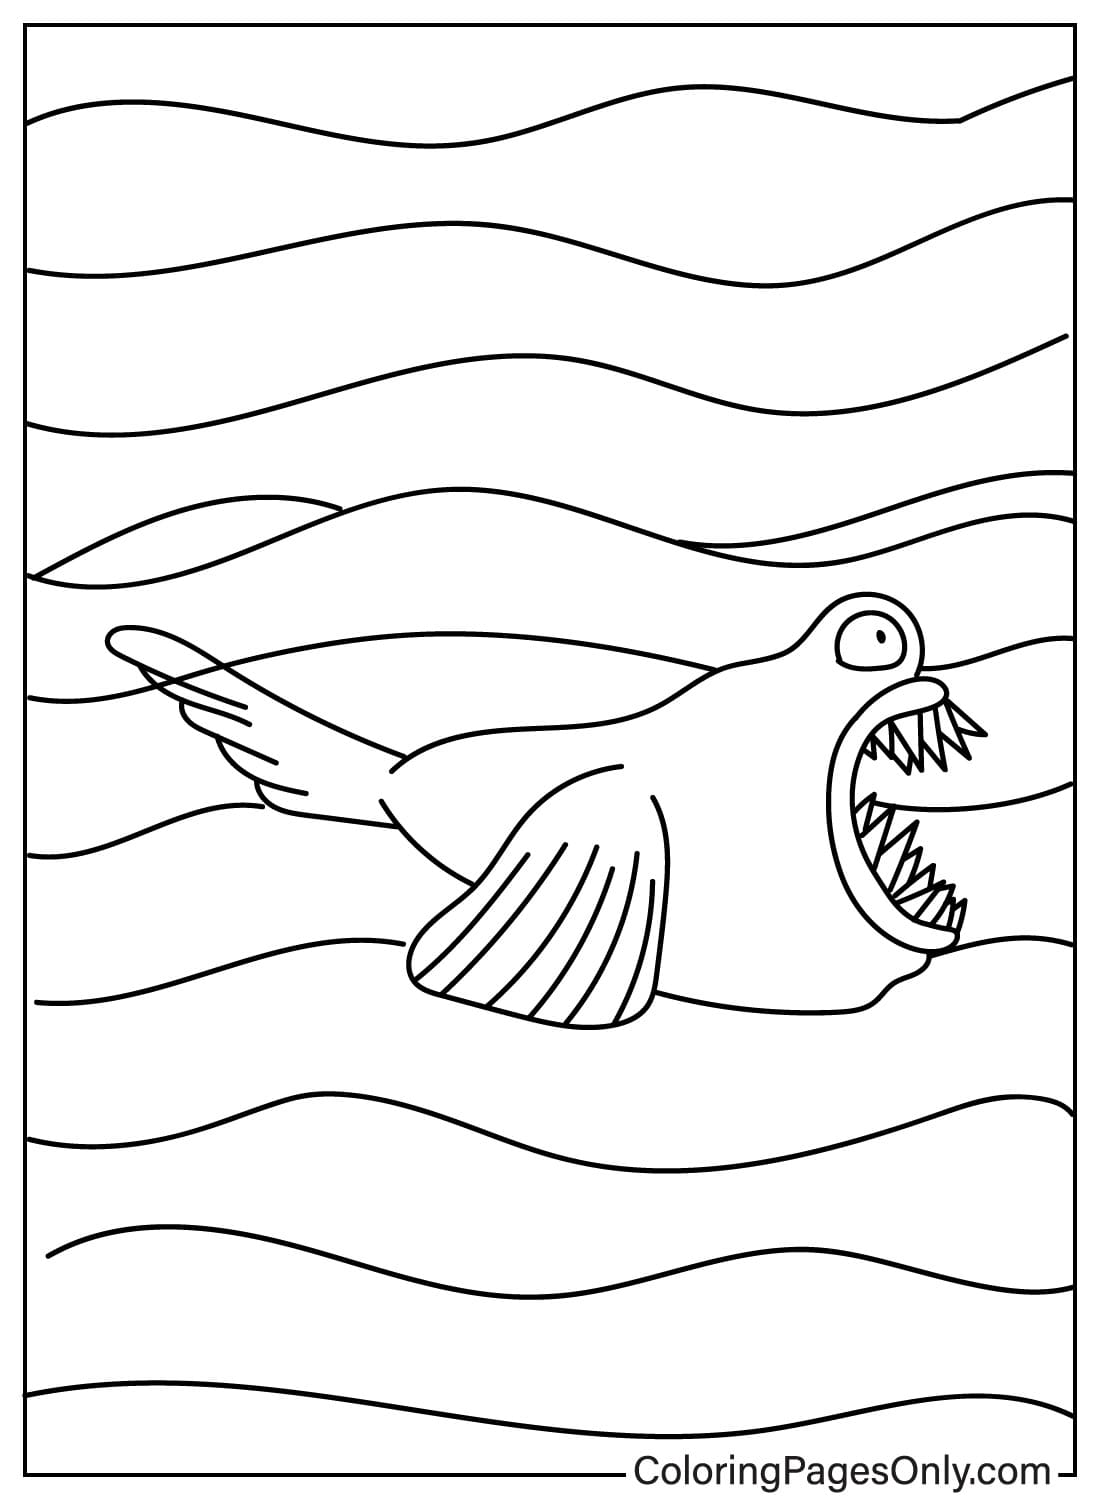 Pictures Zoonomaly Coloring Page from Zoonomaly